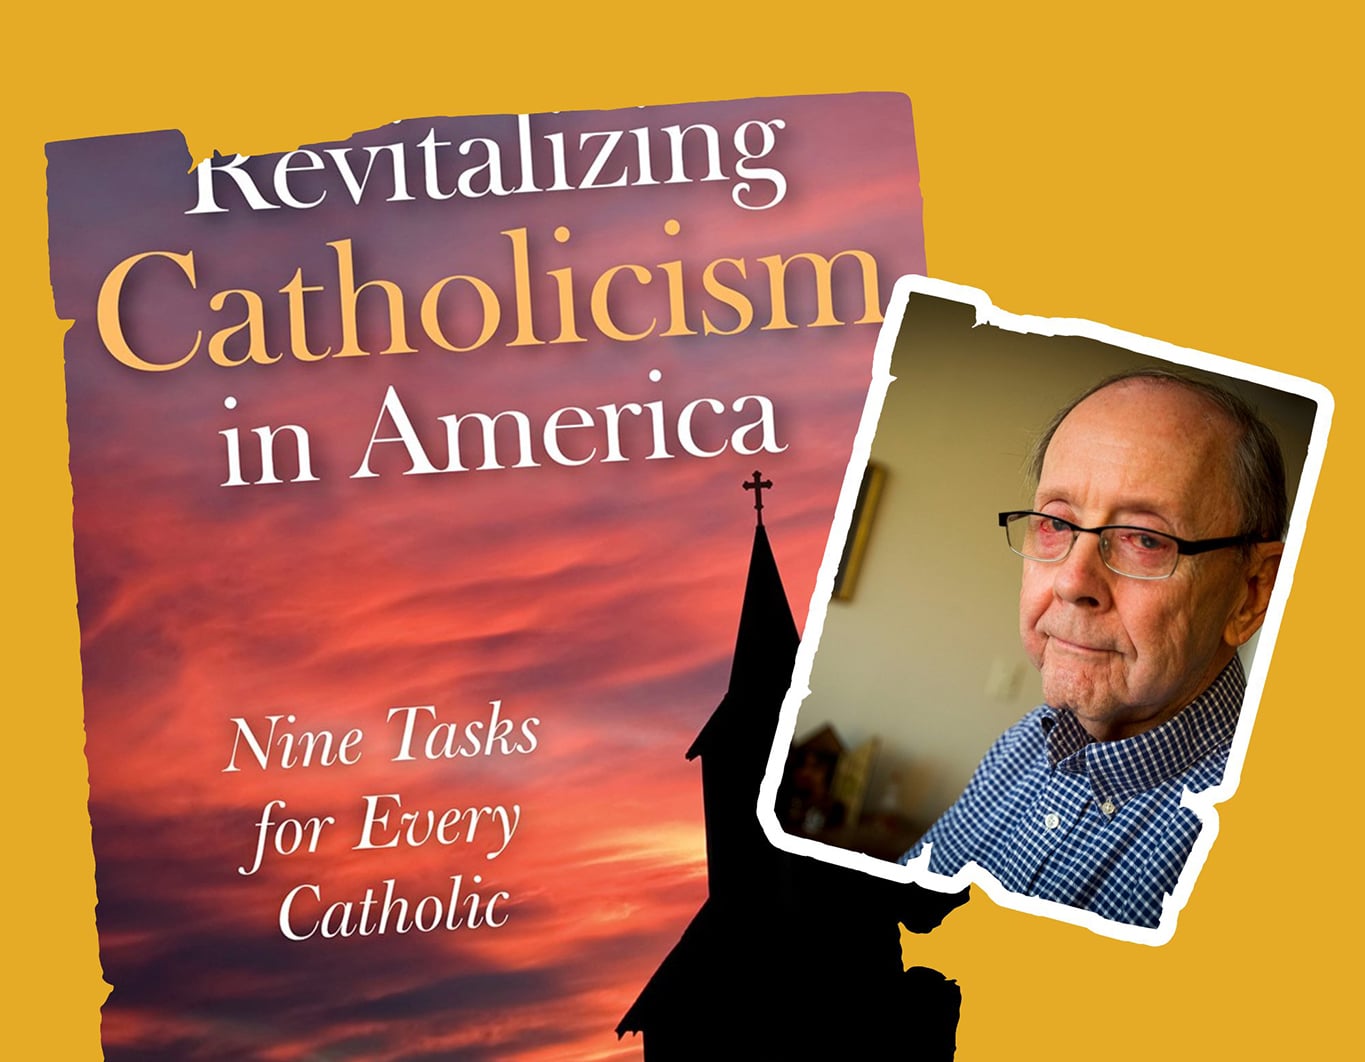 RUSSELL SHAW AND REVITALIZING CATHOLICISM